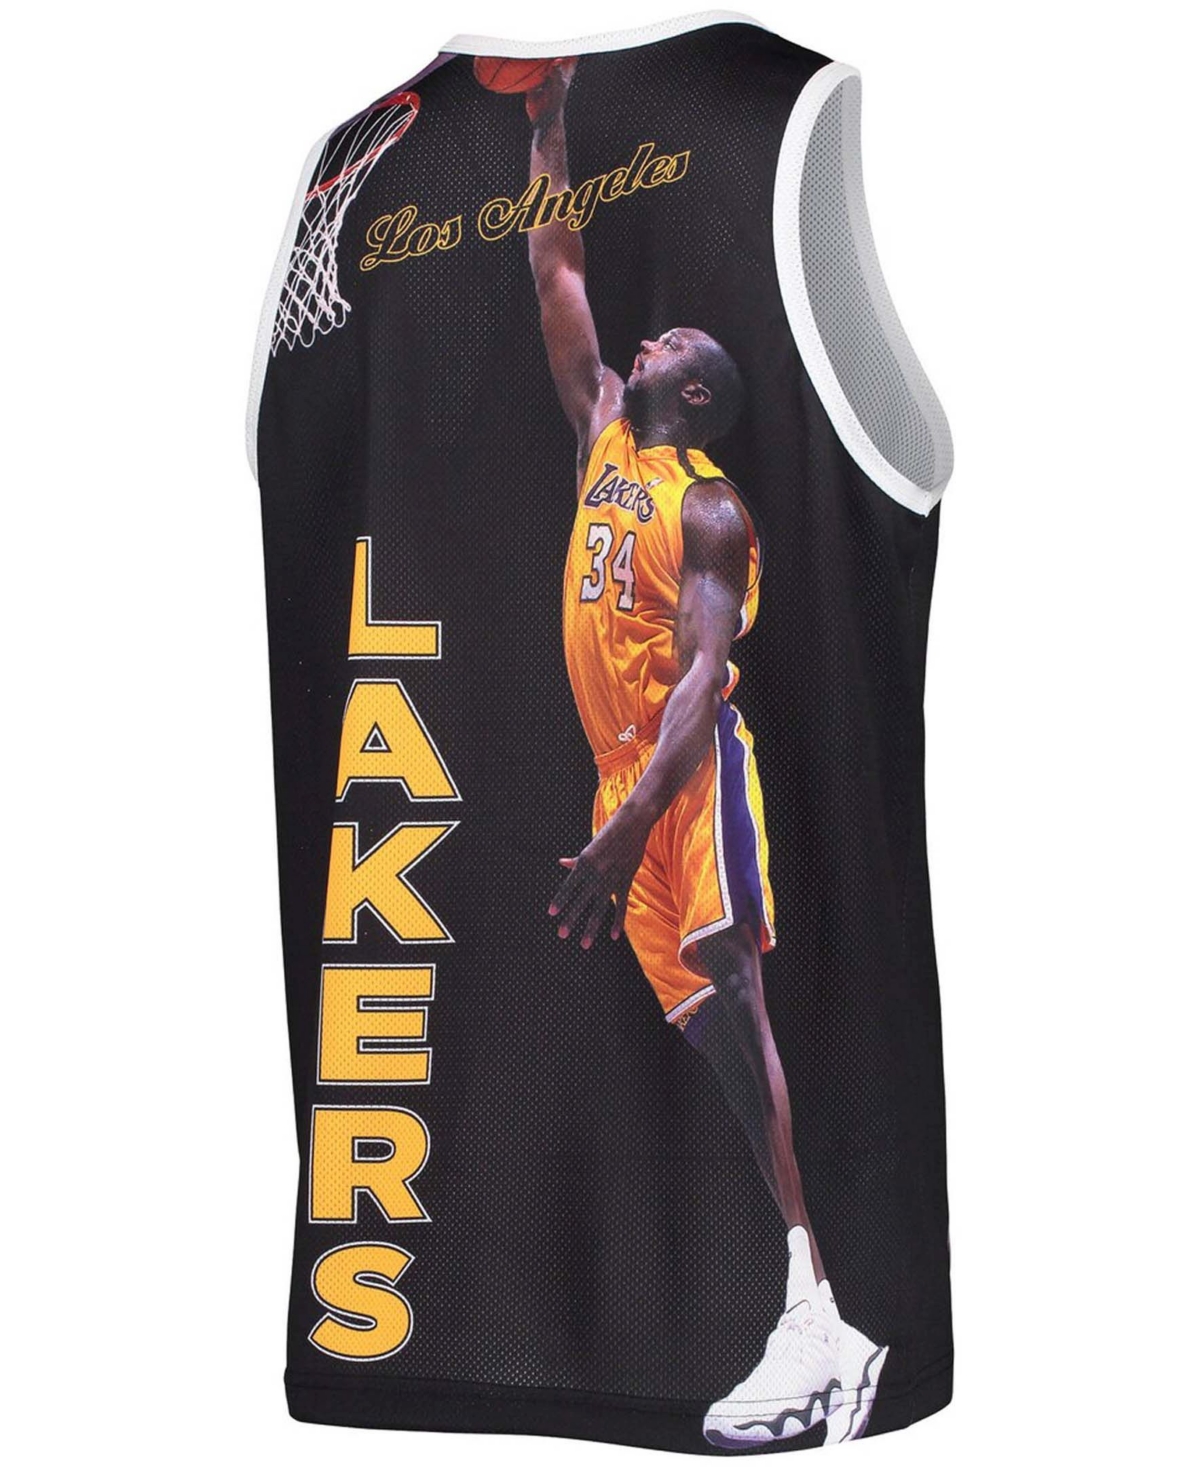 Shop Mitchell & Ness Men's Shaquille O'neal Black Los Angeles Lakers Hardwood Classics Player Tank Top